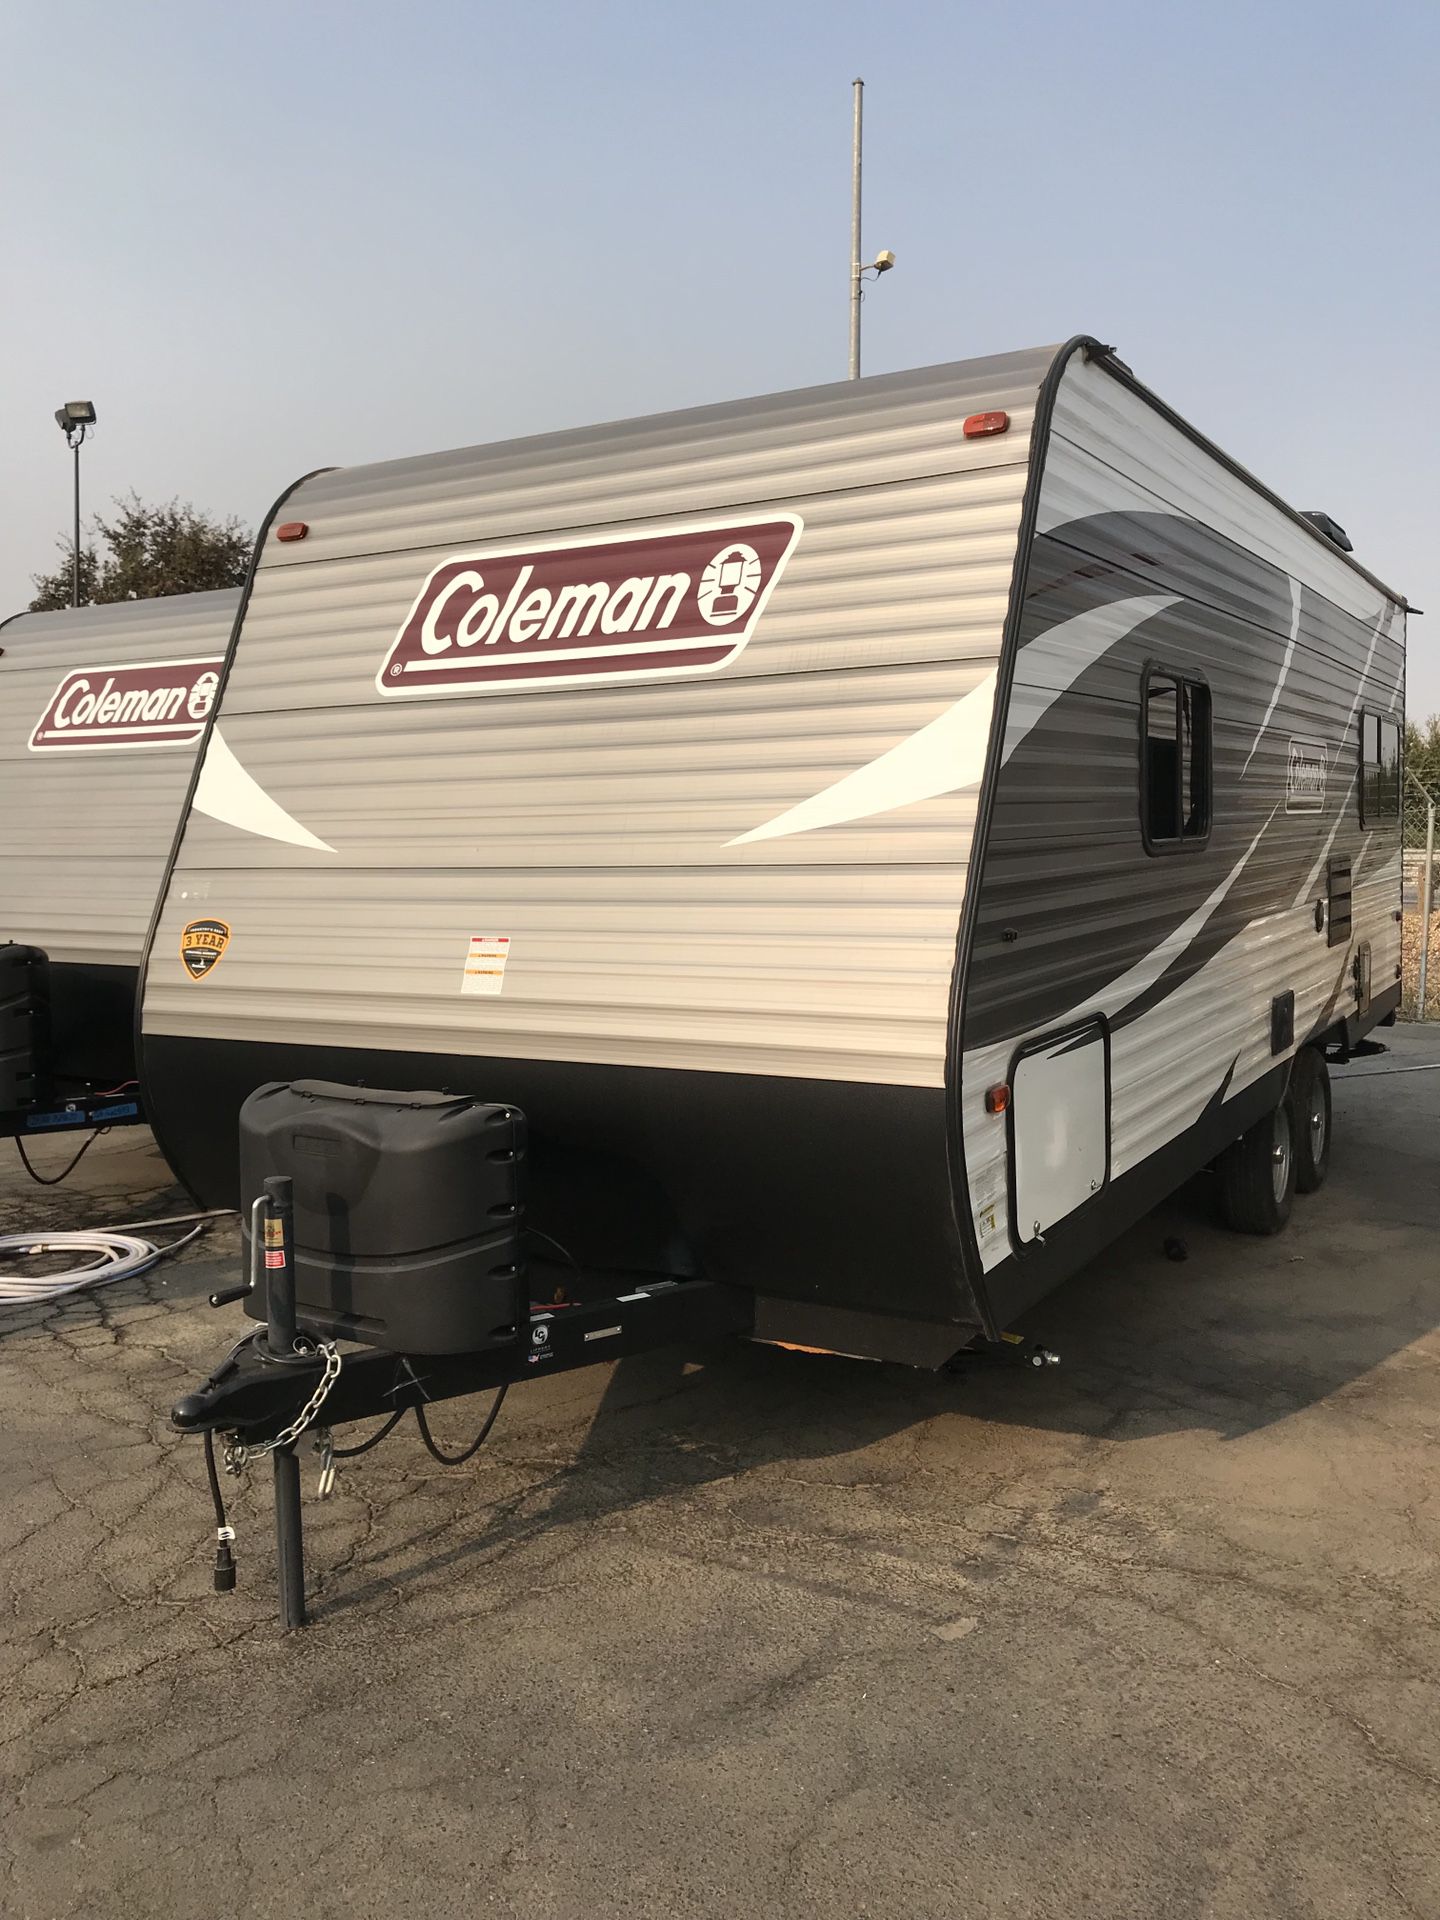 2018 Coleman travel trailer 21 ft. Super clean only used twice. Beautiful trailer.